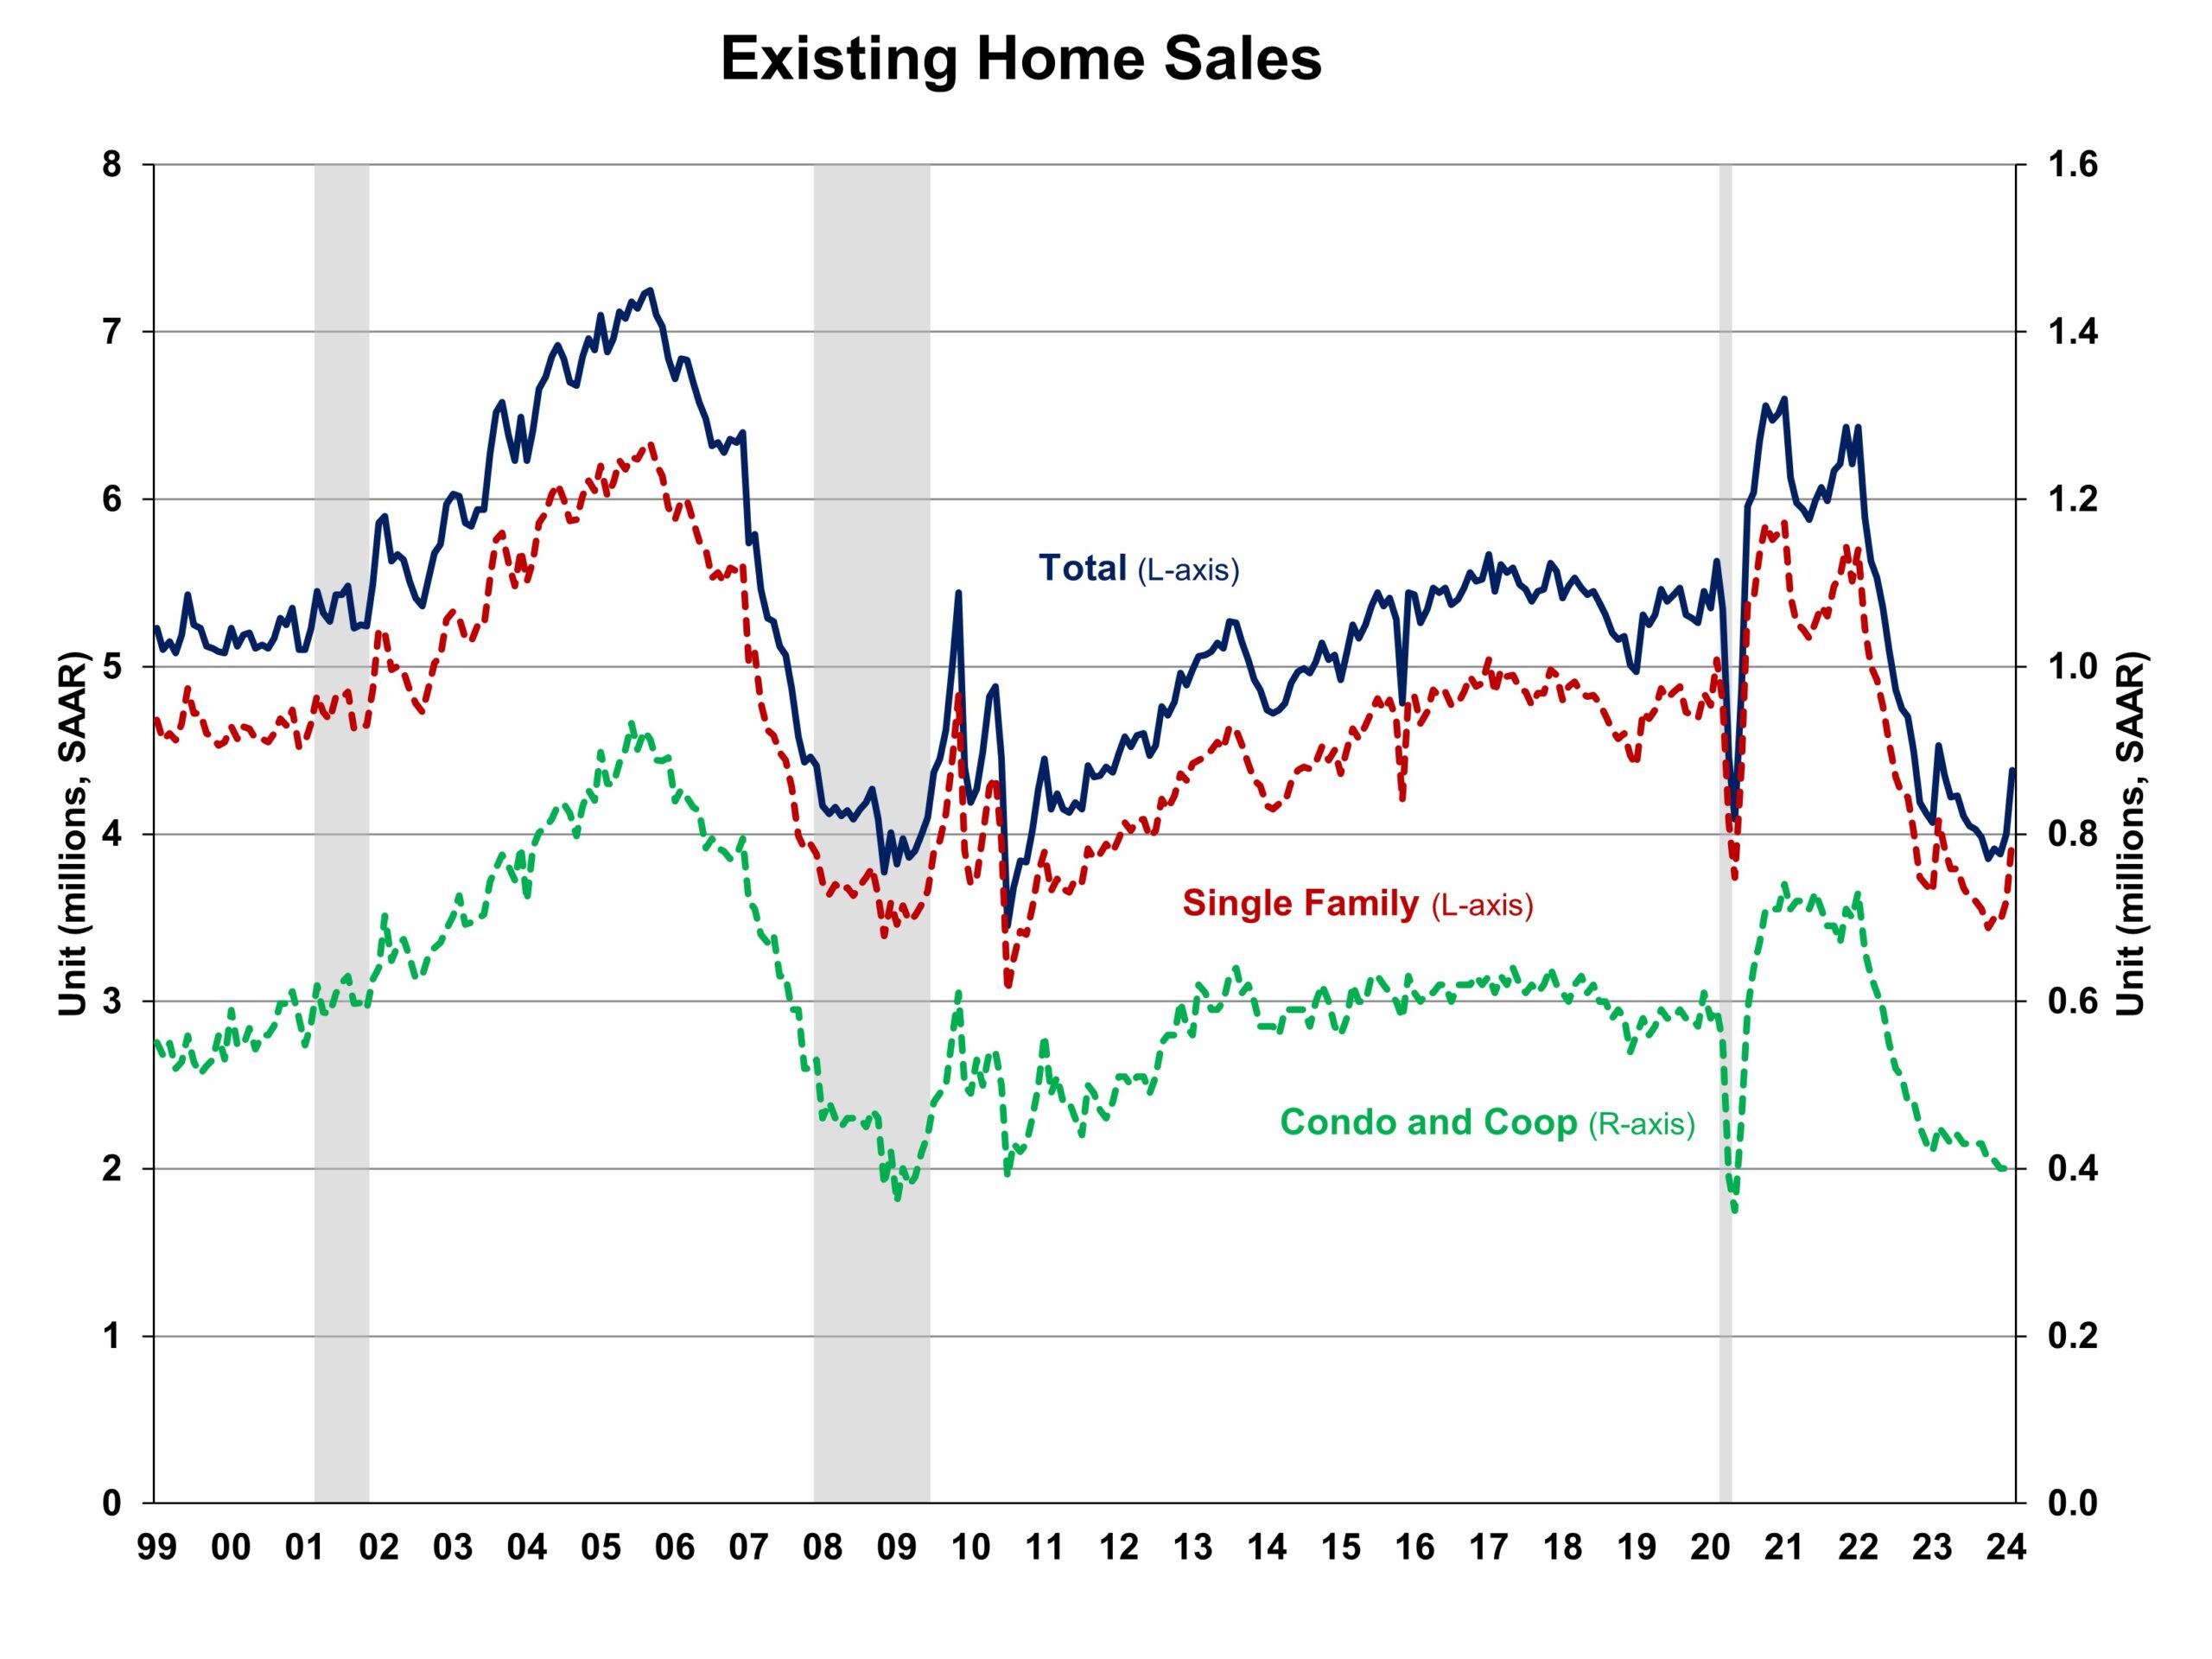 February sees highest number of existing home sales in a year